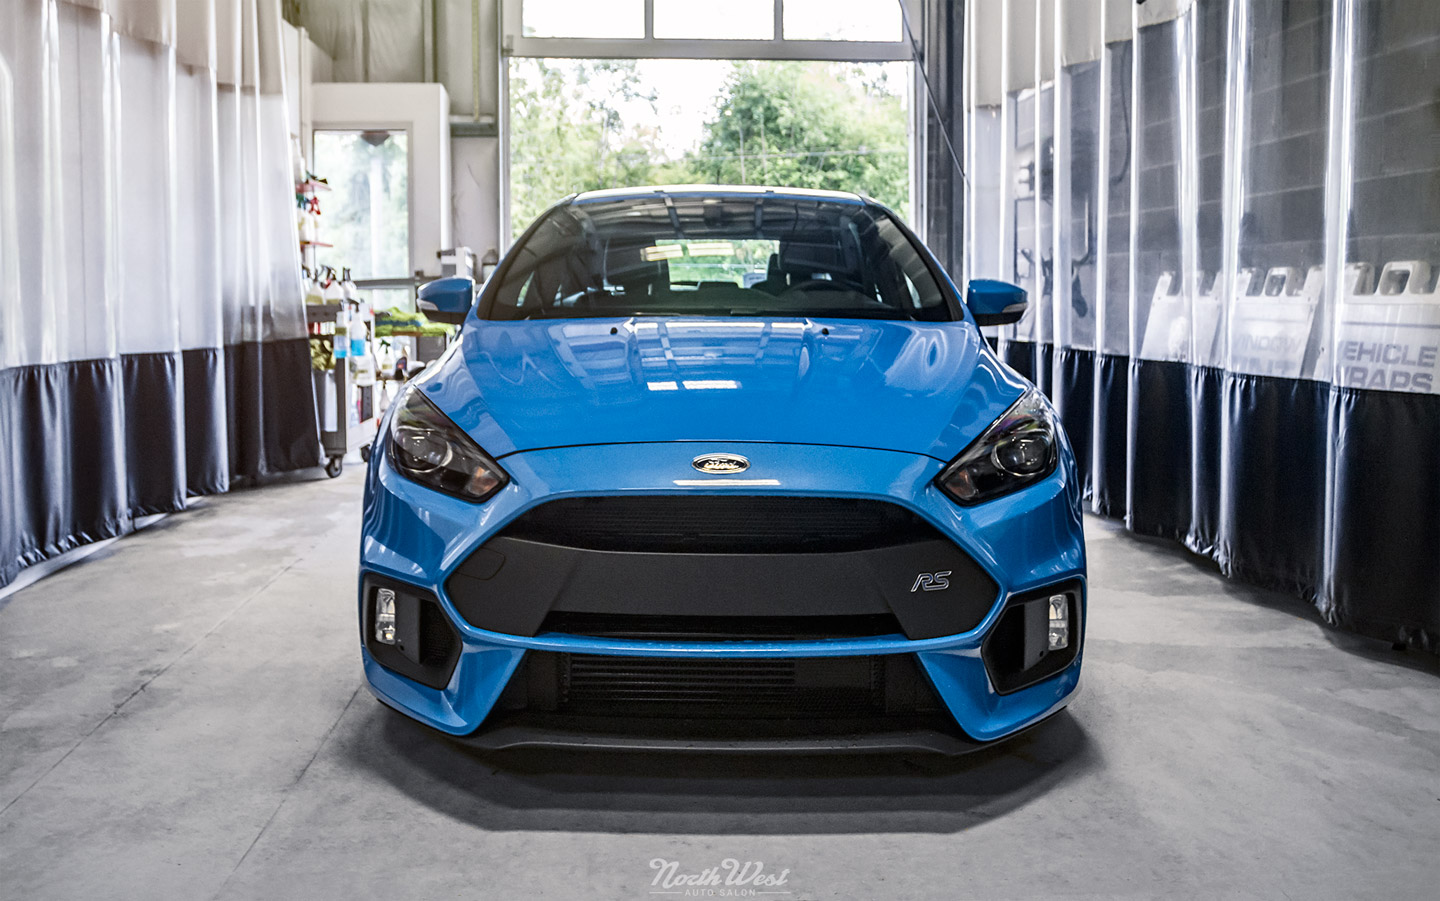 Ford-Focus-RS-new-car-detail-xpel-paint-protection-spectra-photosync-window-tint-hand-wash-car-wash-nw